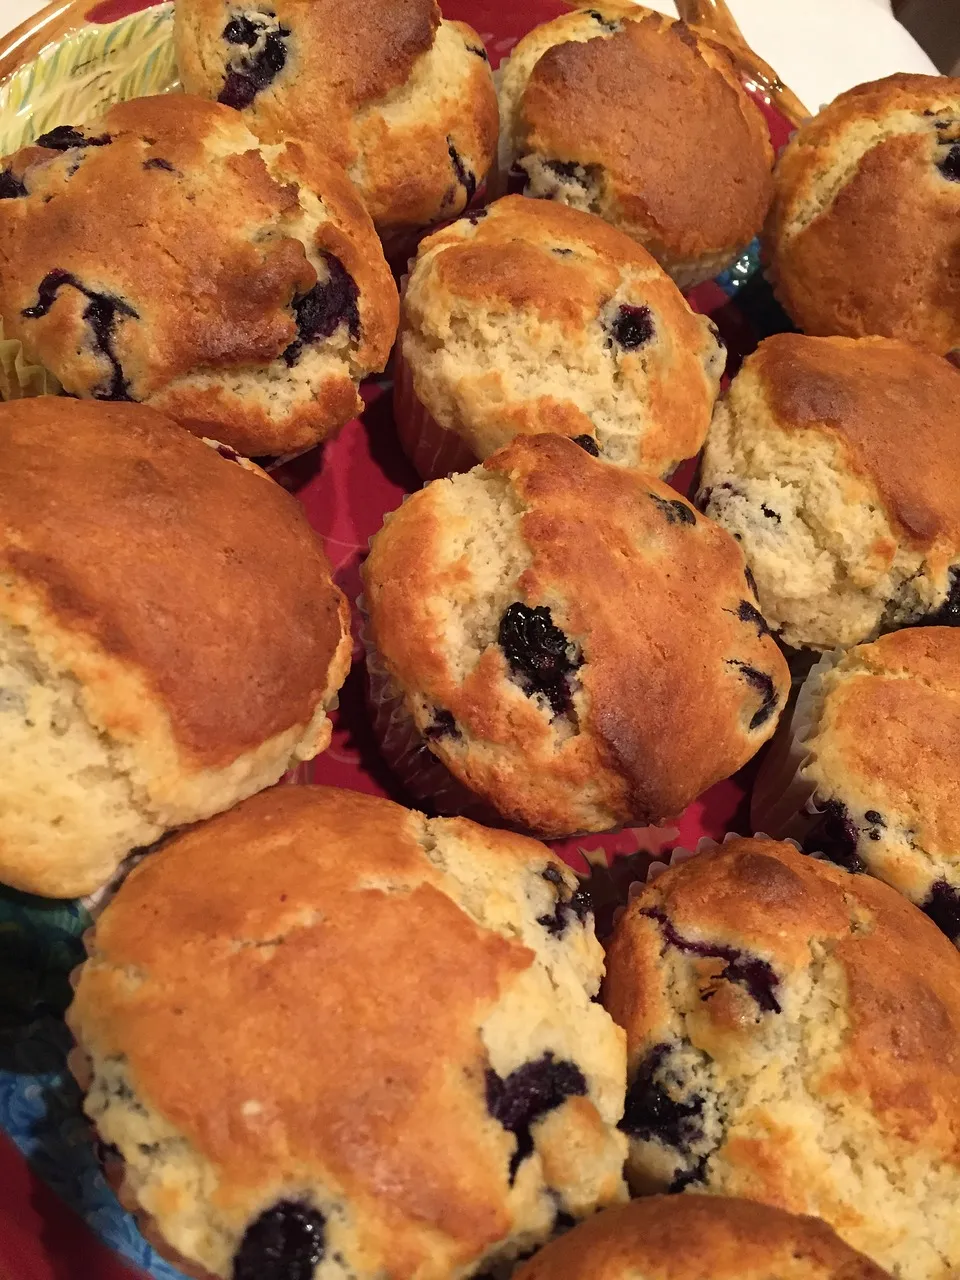 Blueberry muffins. Photo by CandyH2O